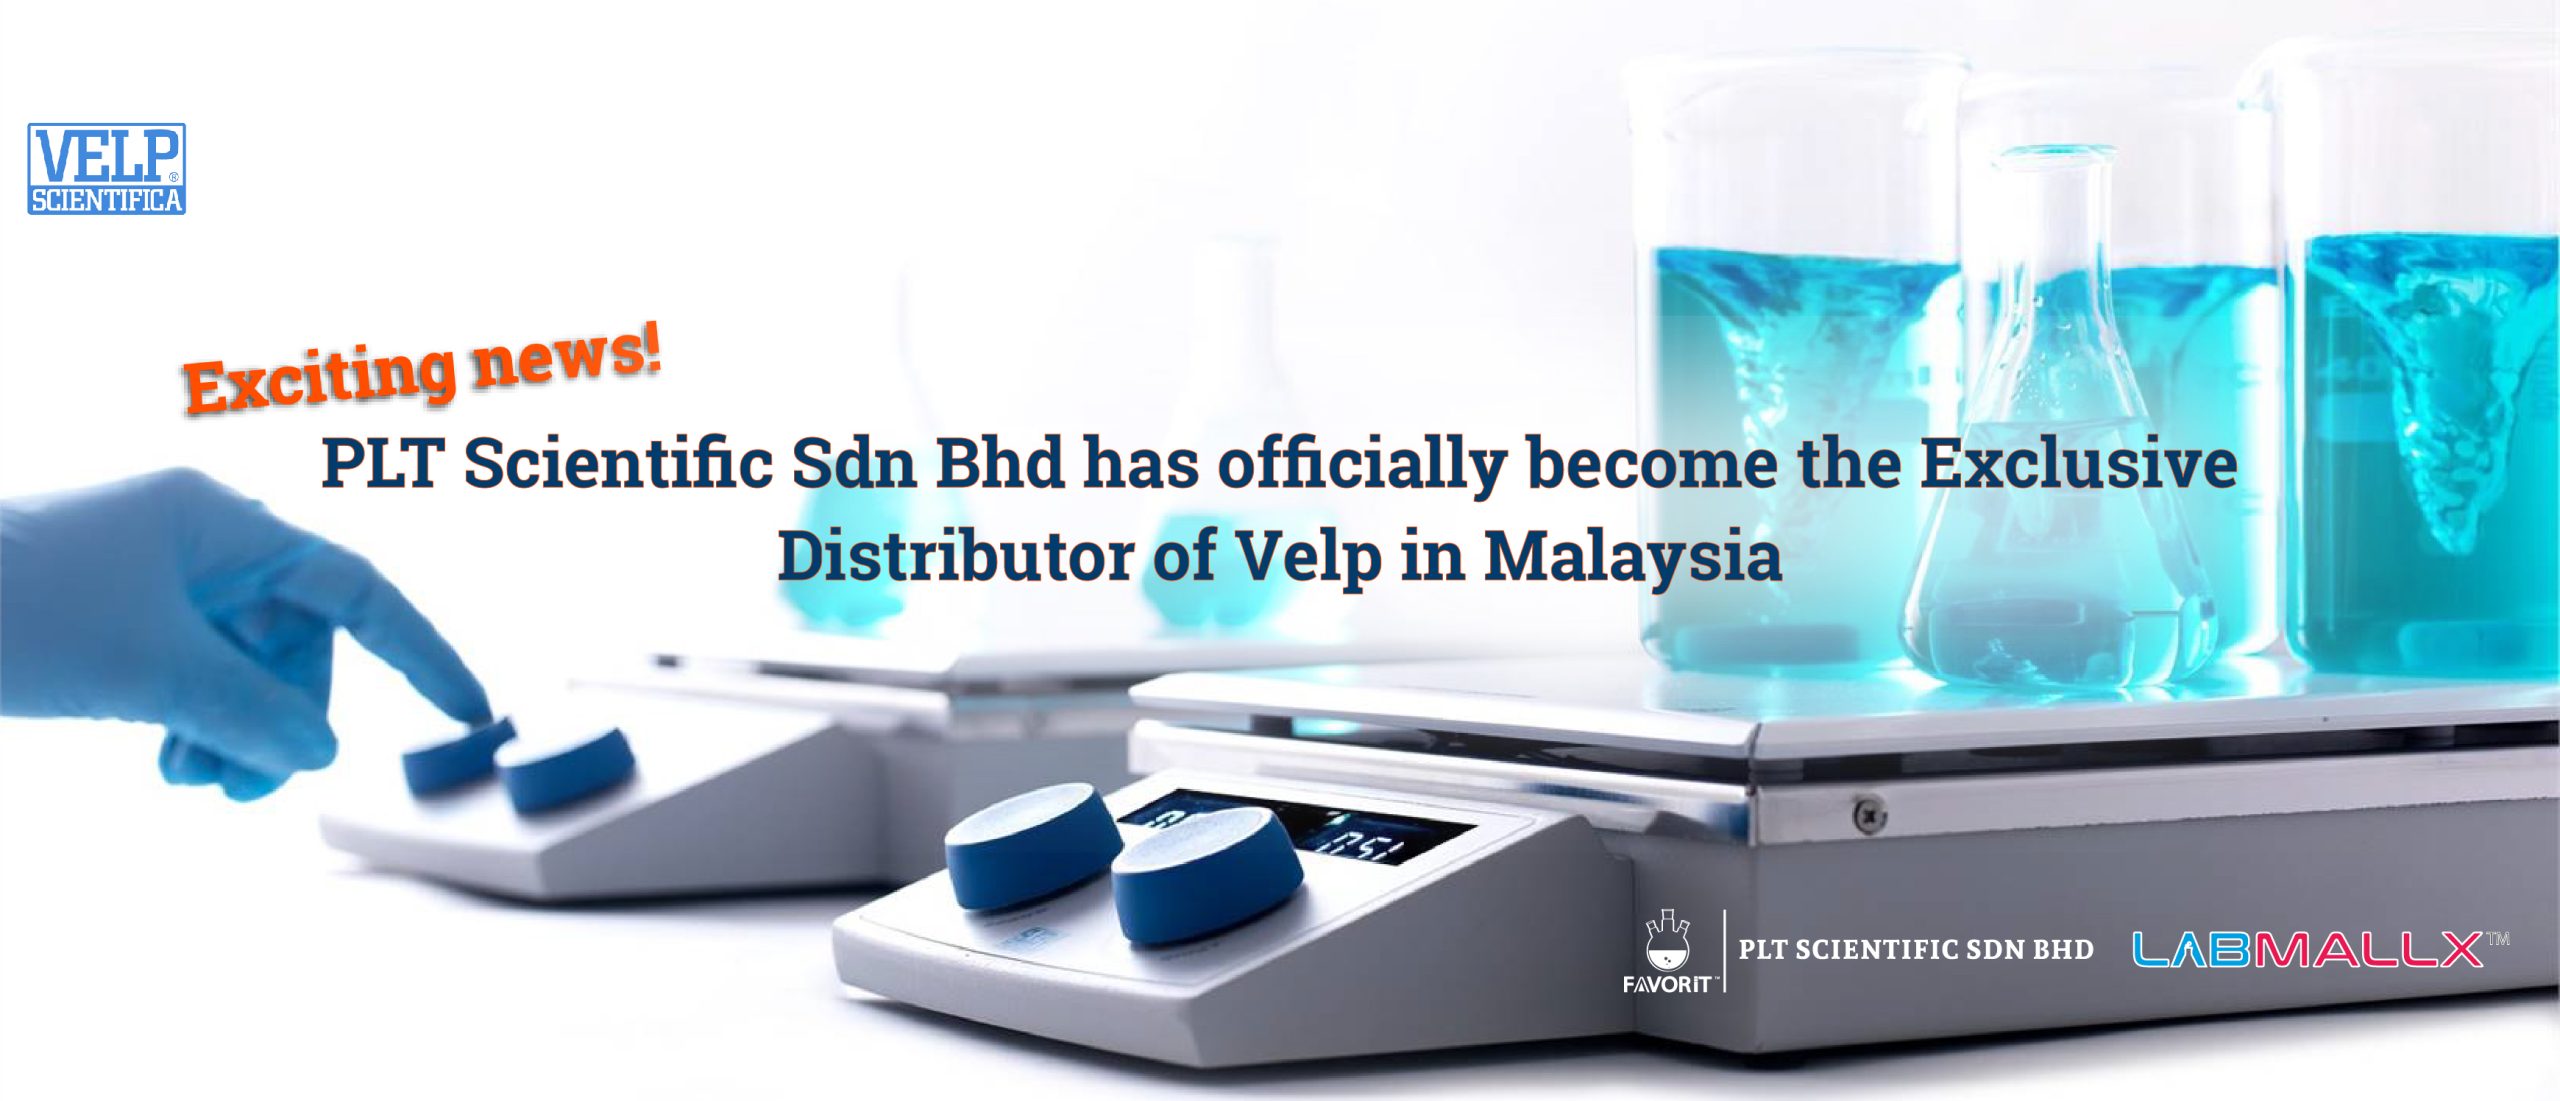 Breaking News: PLT Scientific Sdn Bhd Secures Exclusive Distributorship of Velp in Malaysia